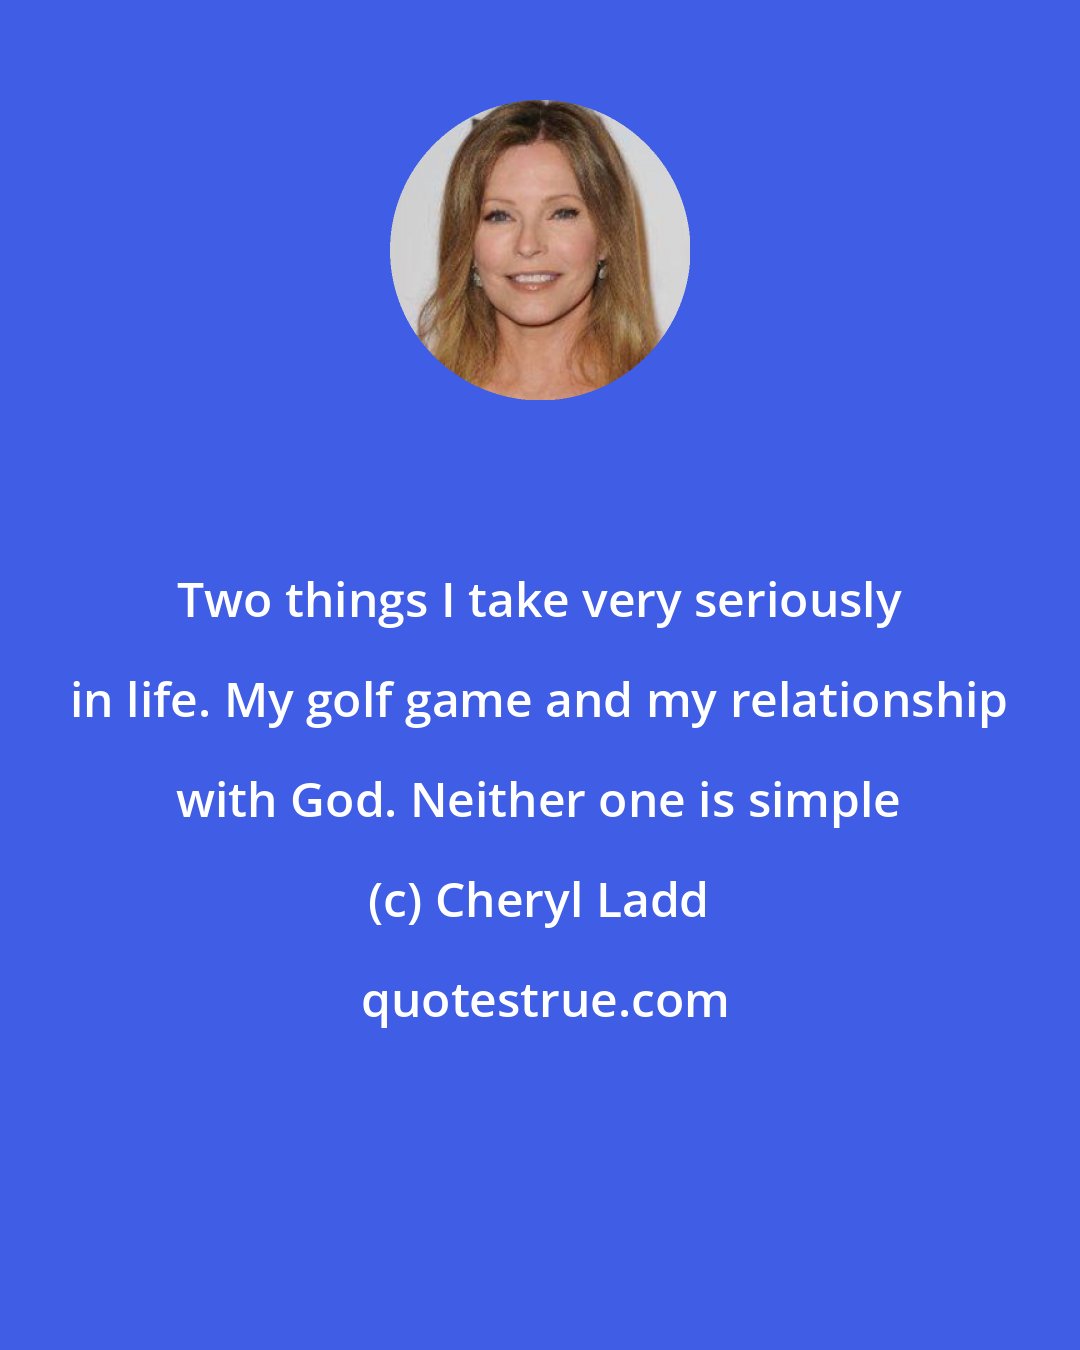 Cheryl Ladd: Two things I take very seriously in life. My golf game and my relationship with God. Neither one is simple